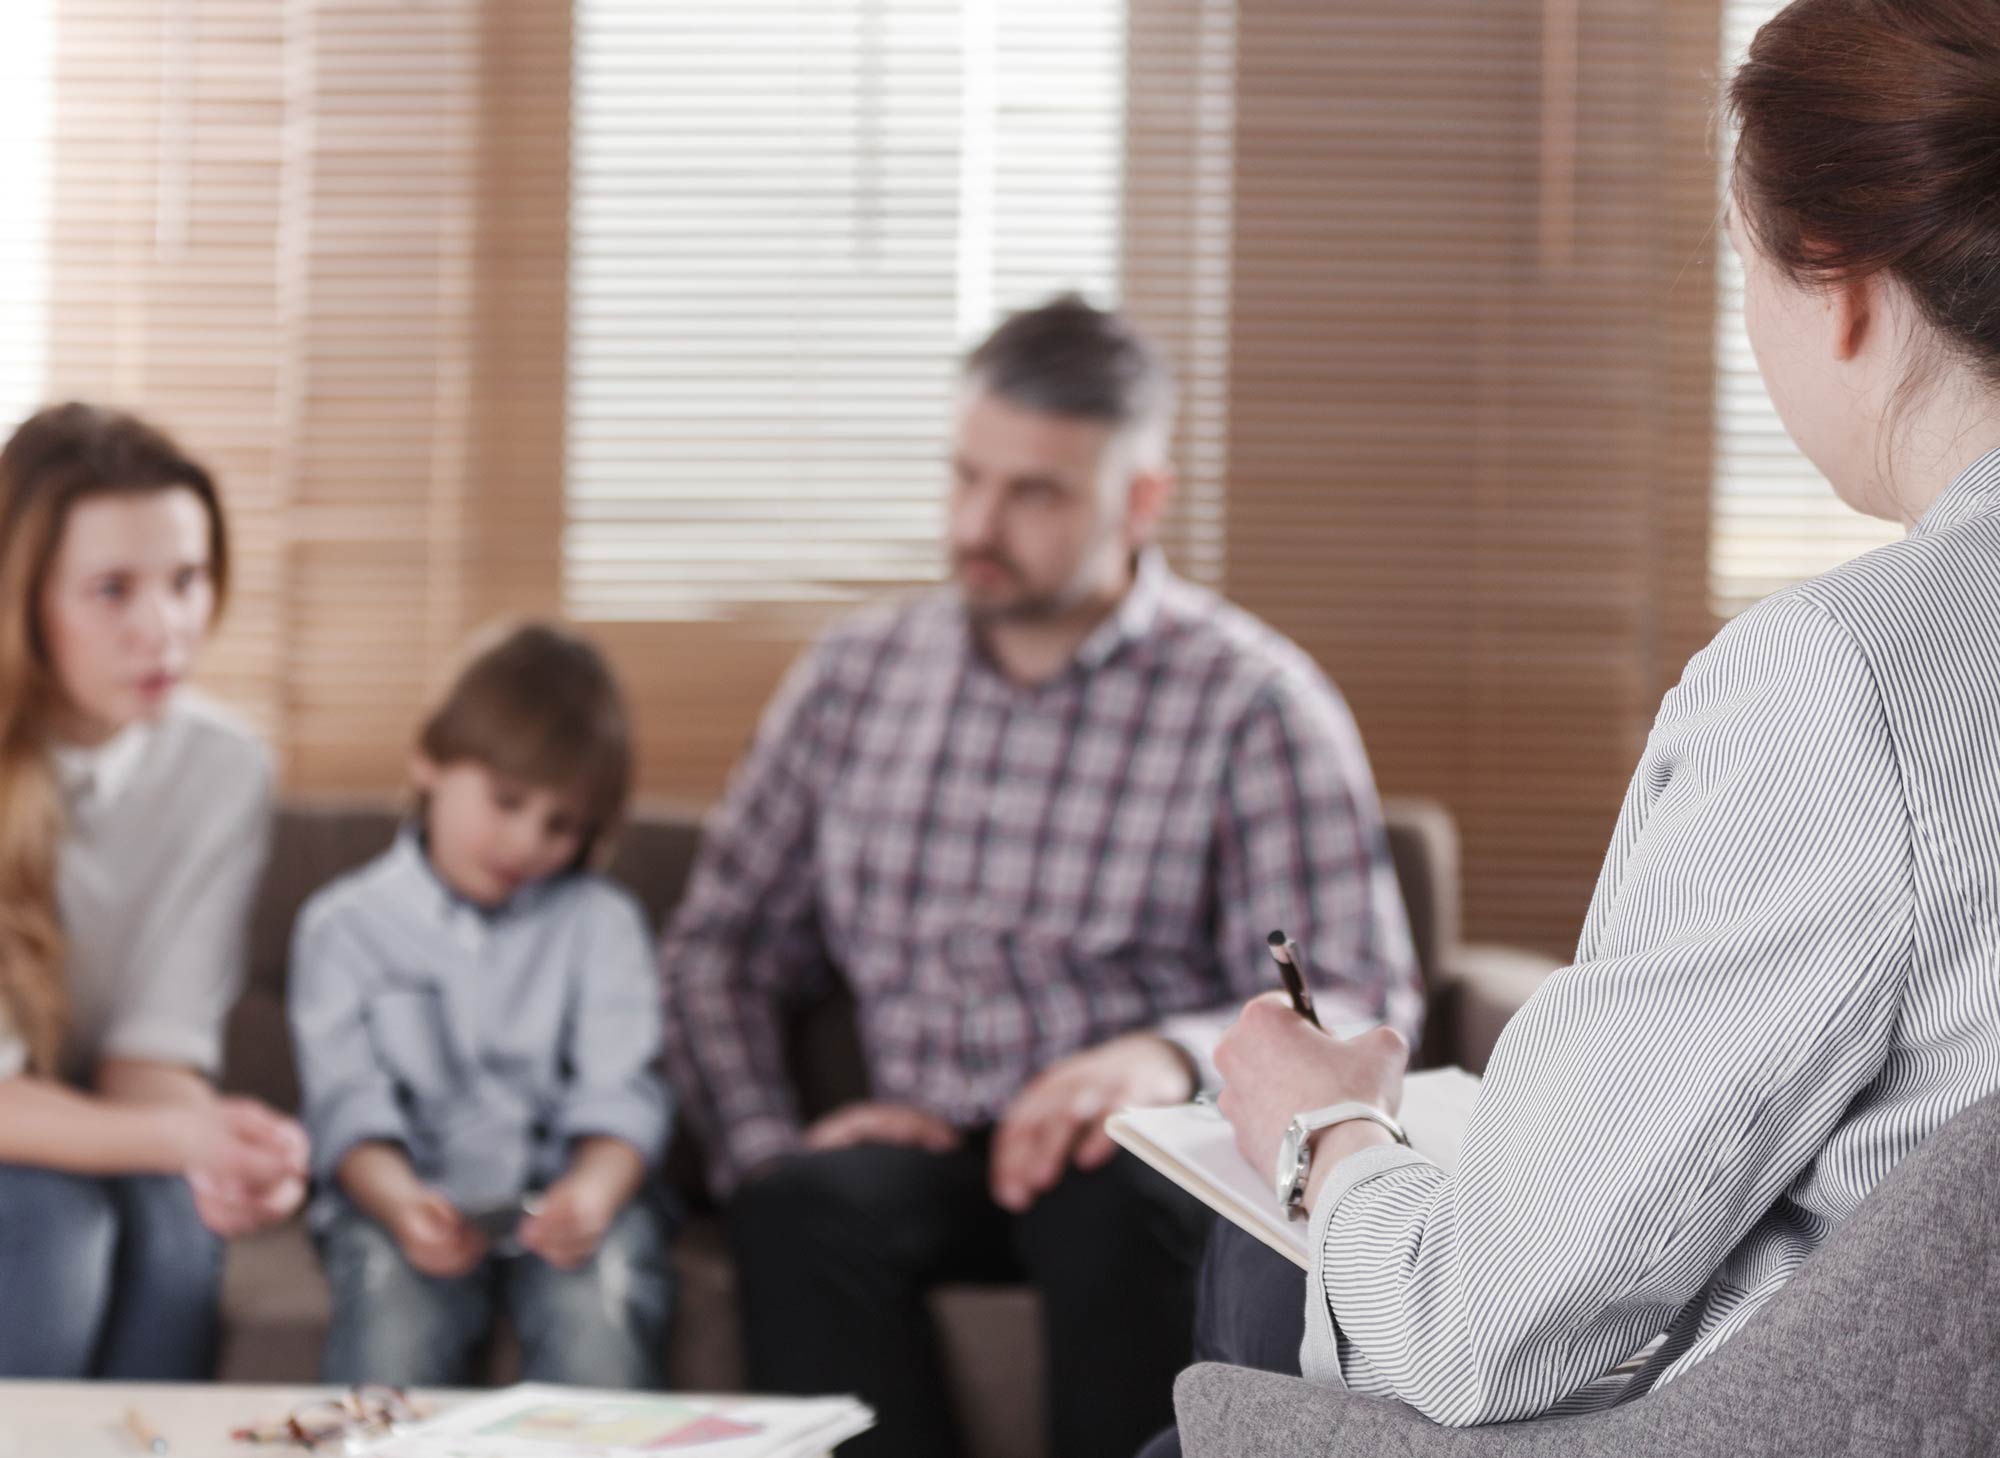 worc's family therapy program